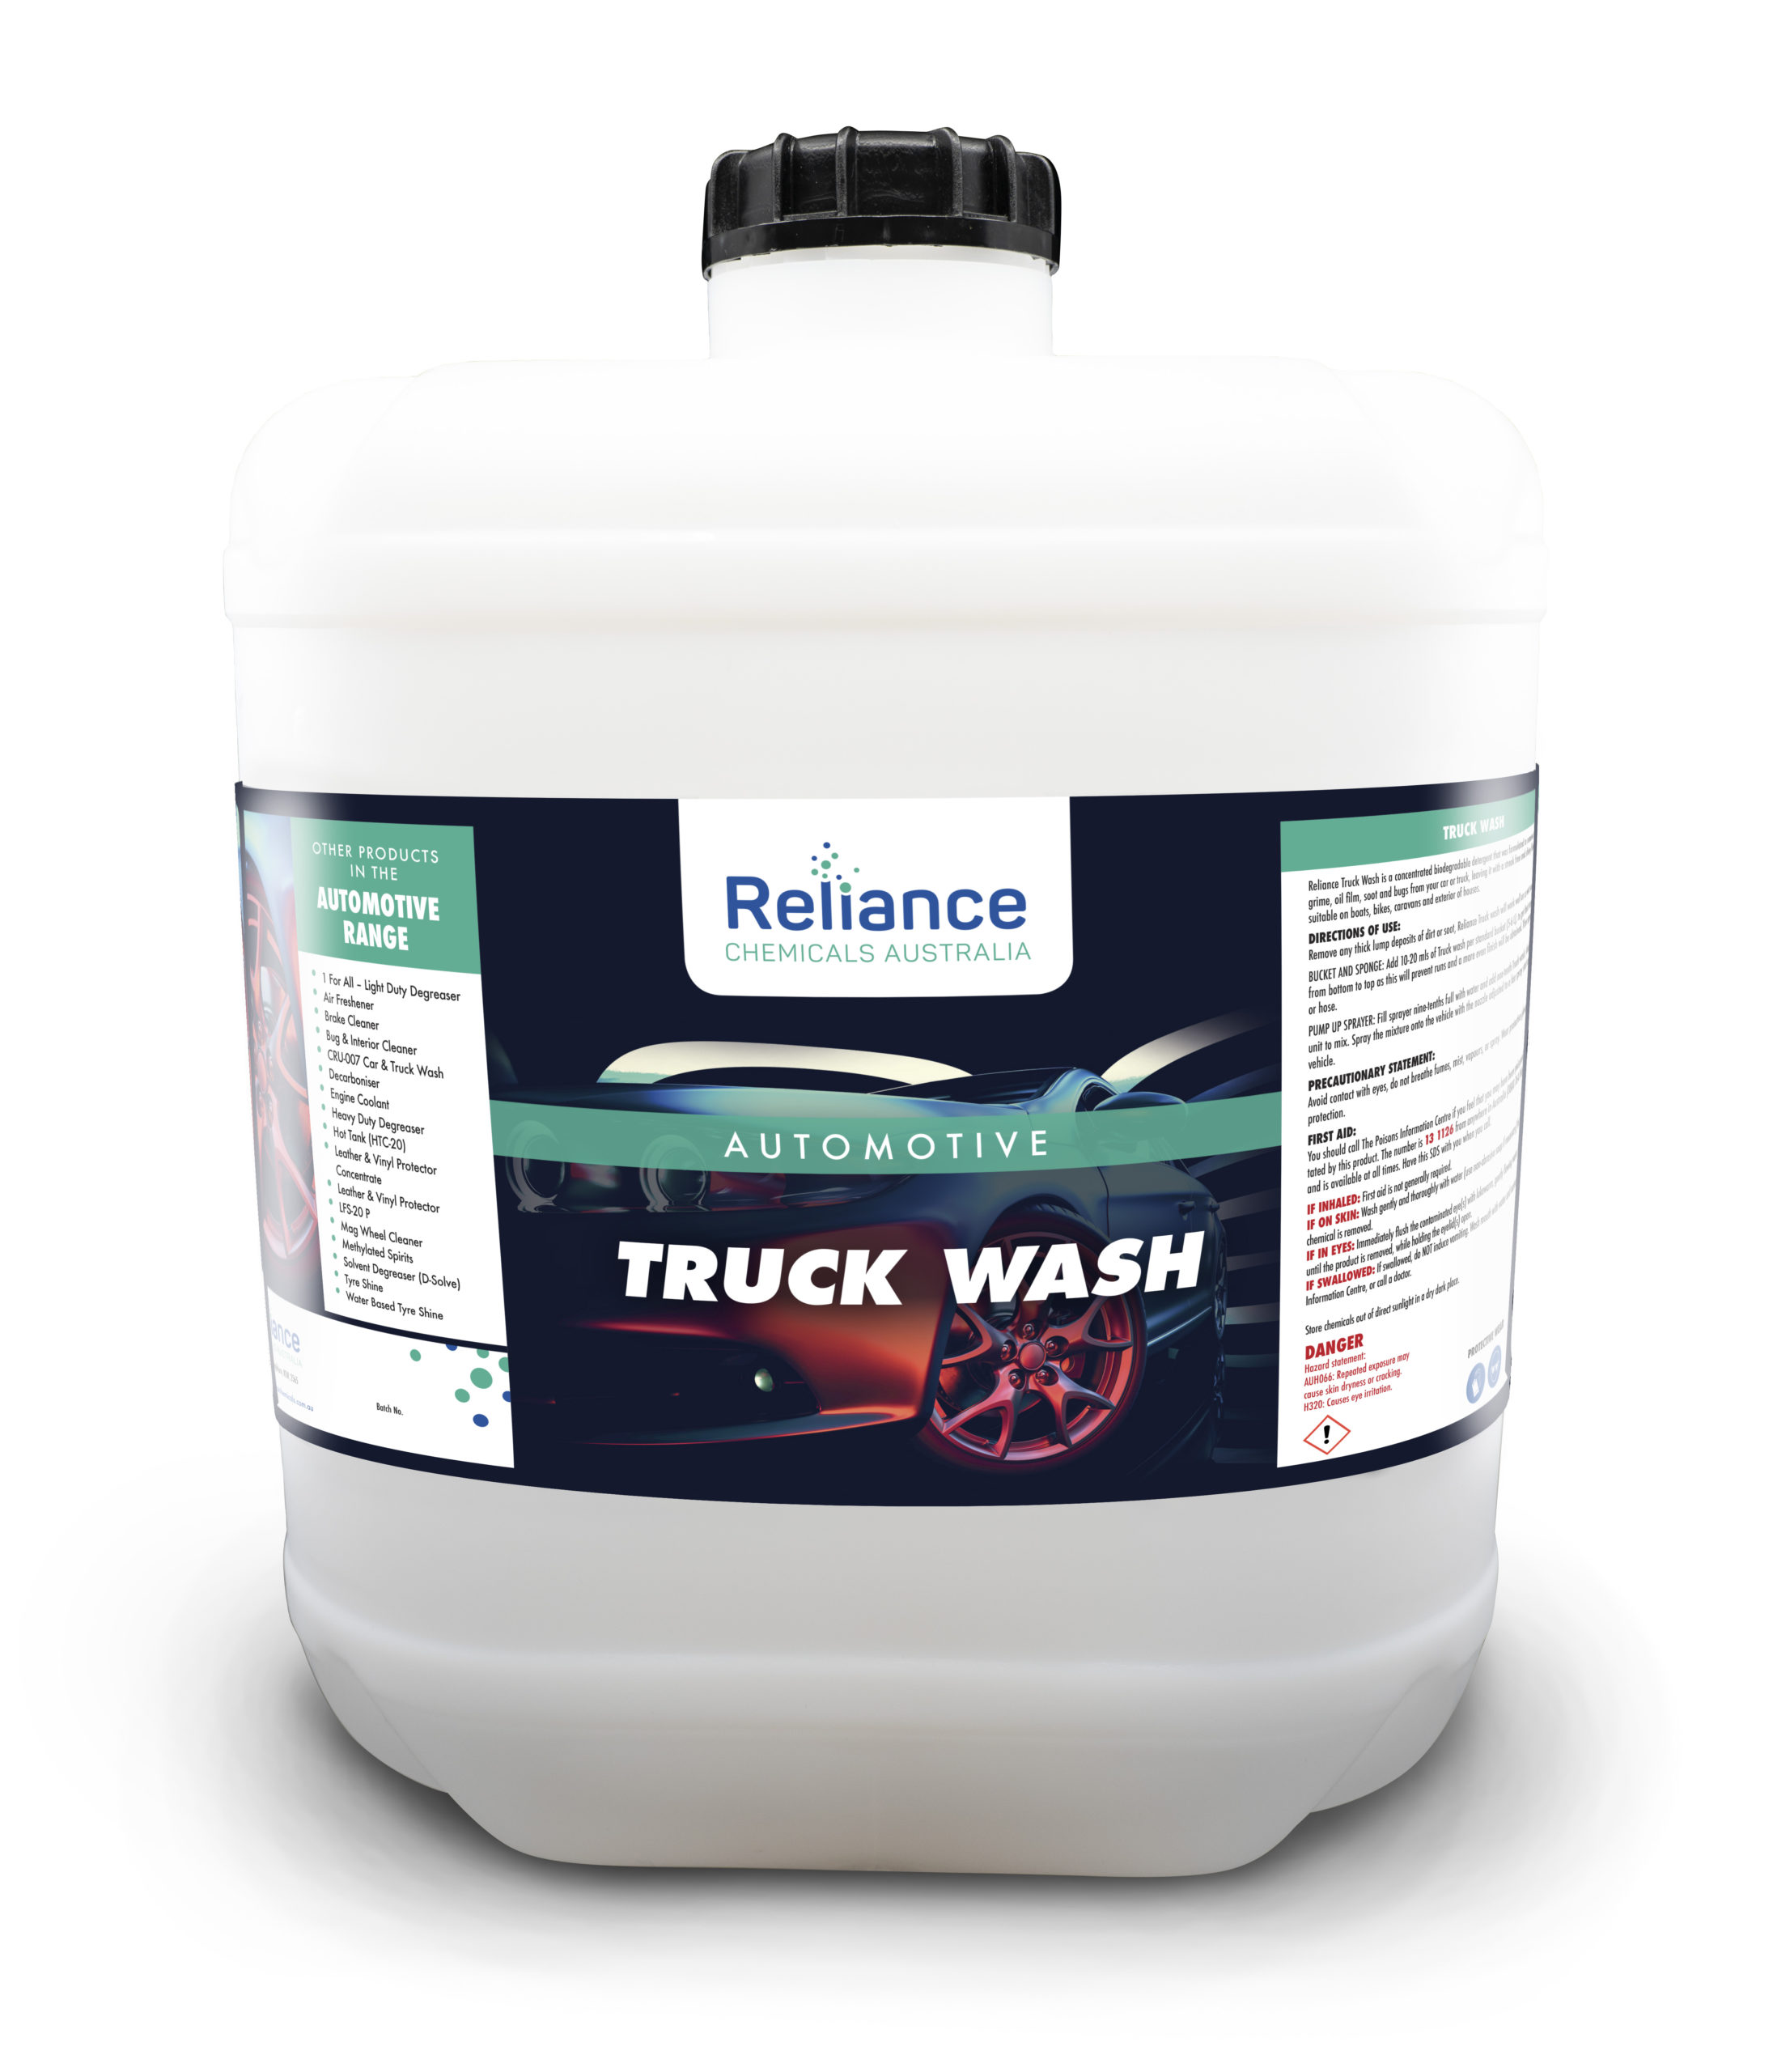 Truck Wash Chemicals: All You Should Know